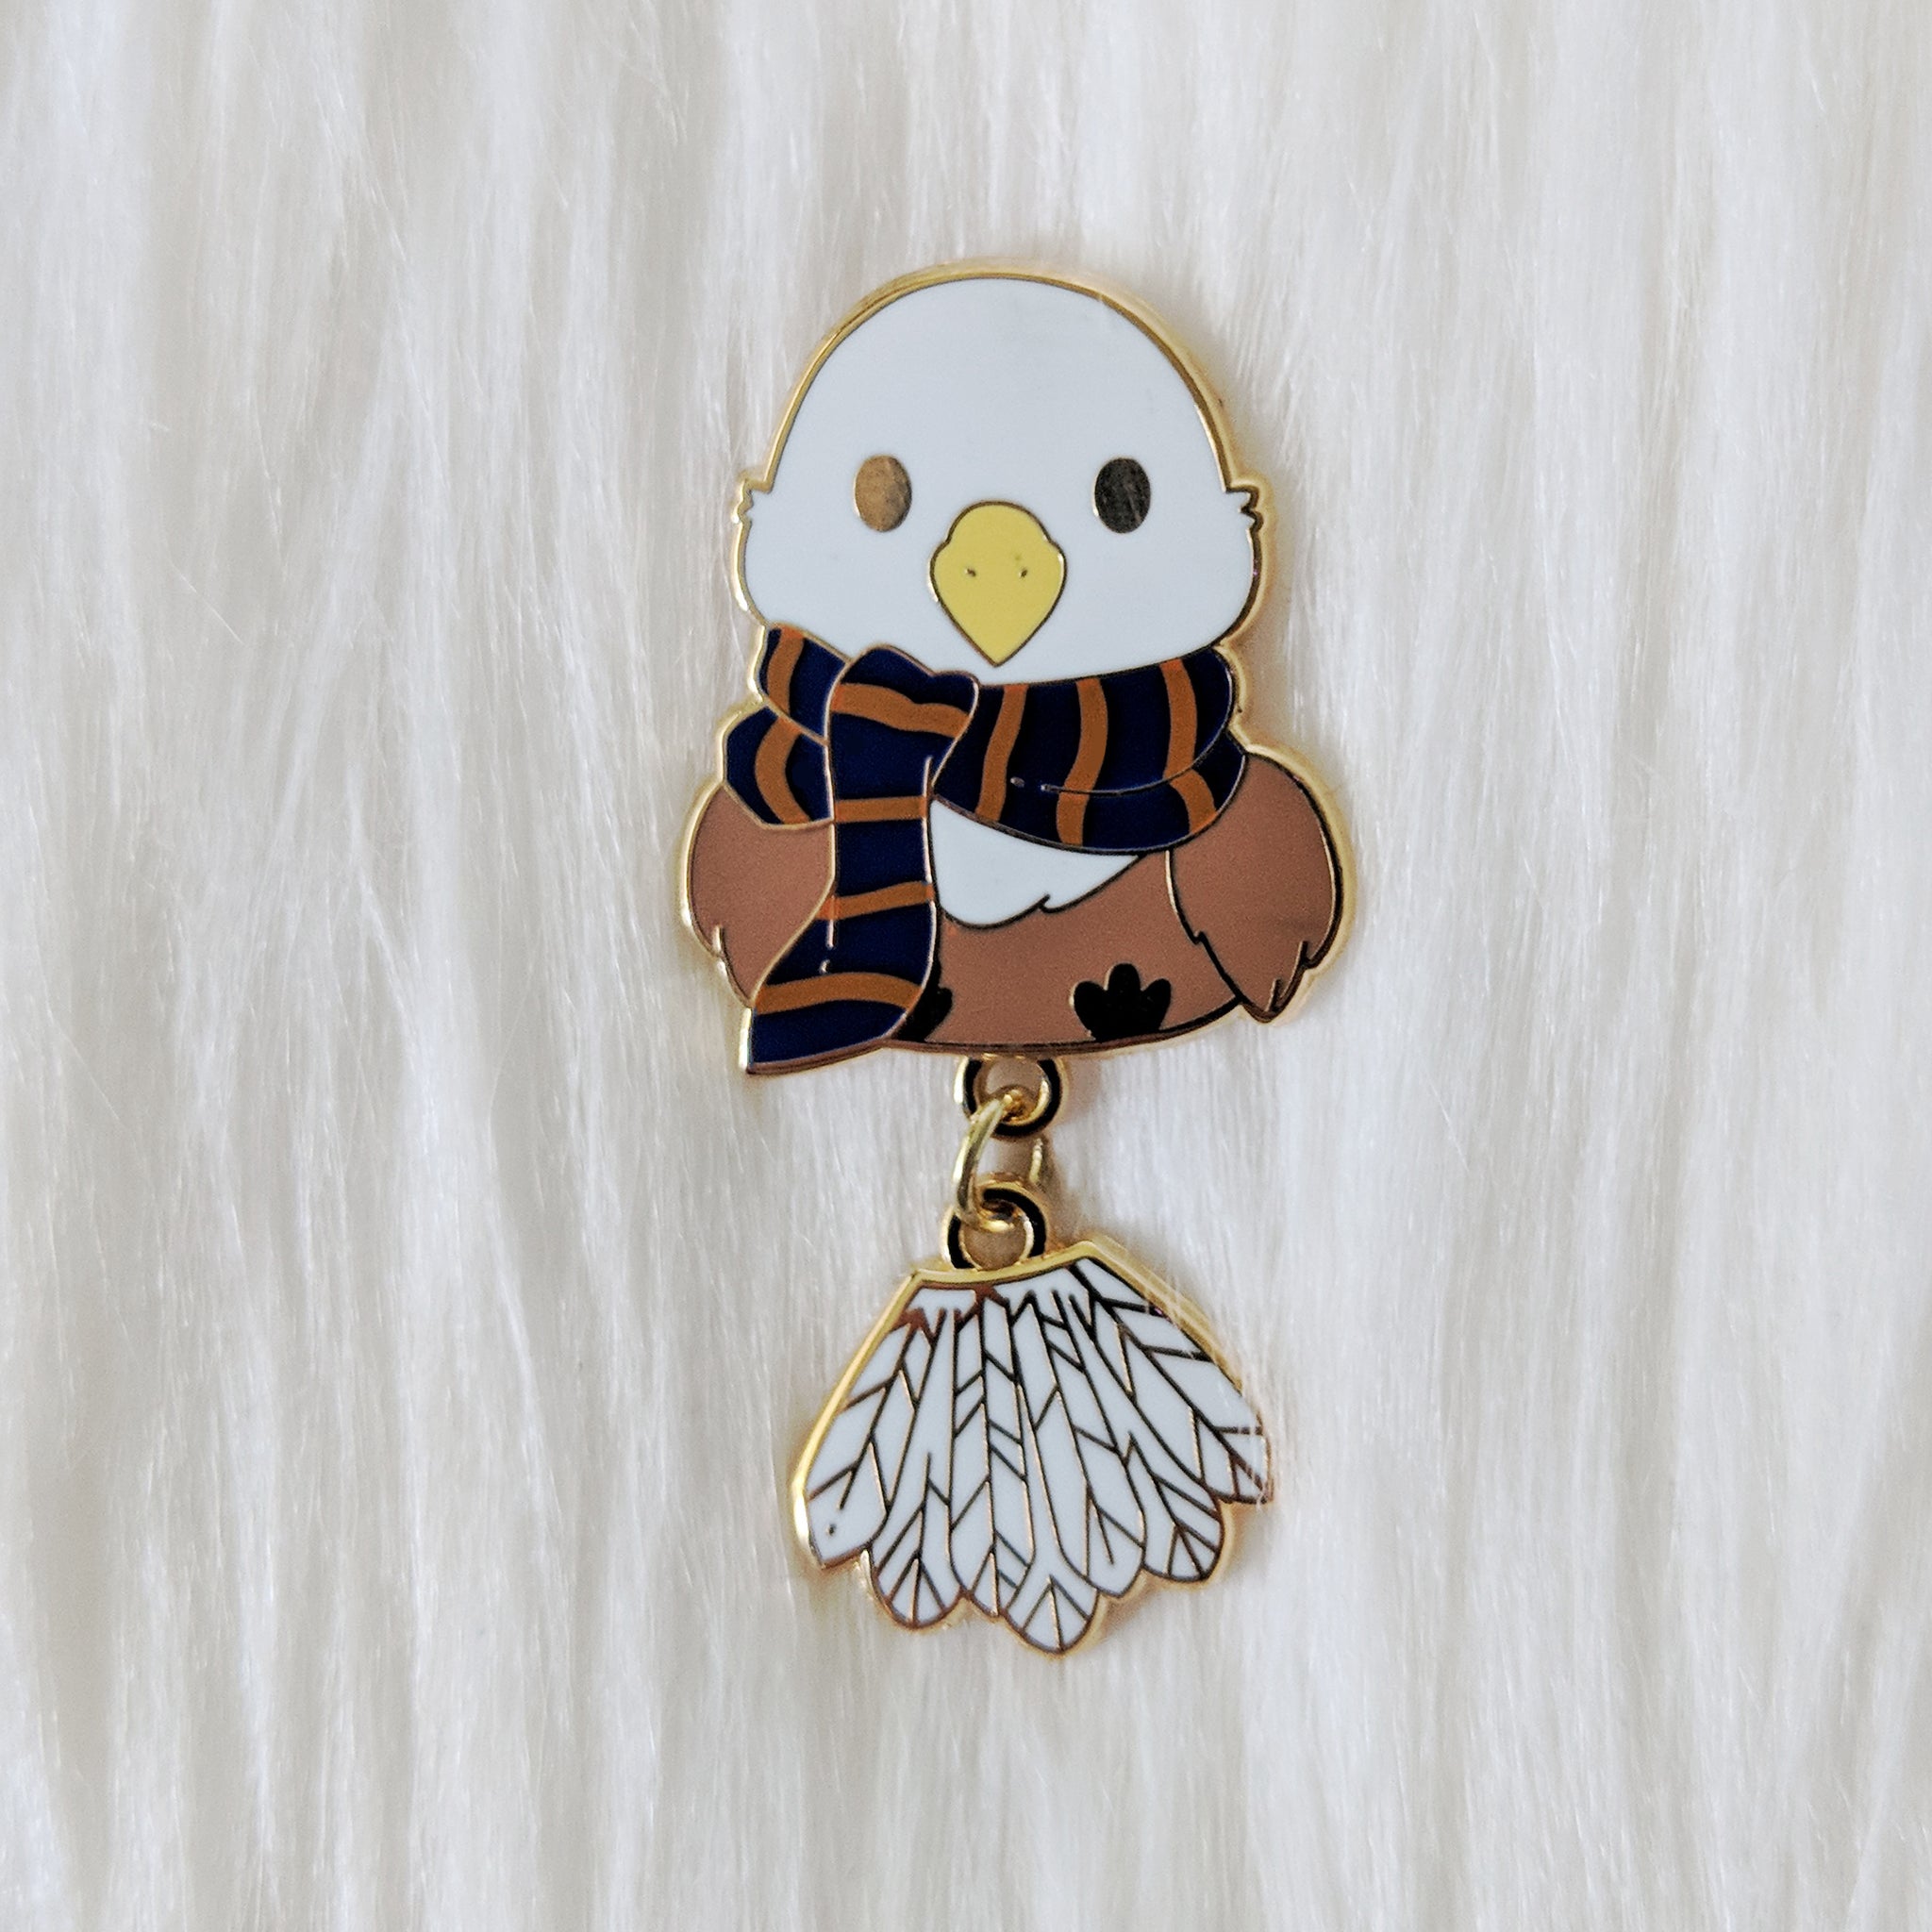 Magical House Animal Mascot Enamel Pin - Adorable Beasts & Where I Found Them Pin